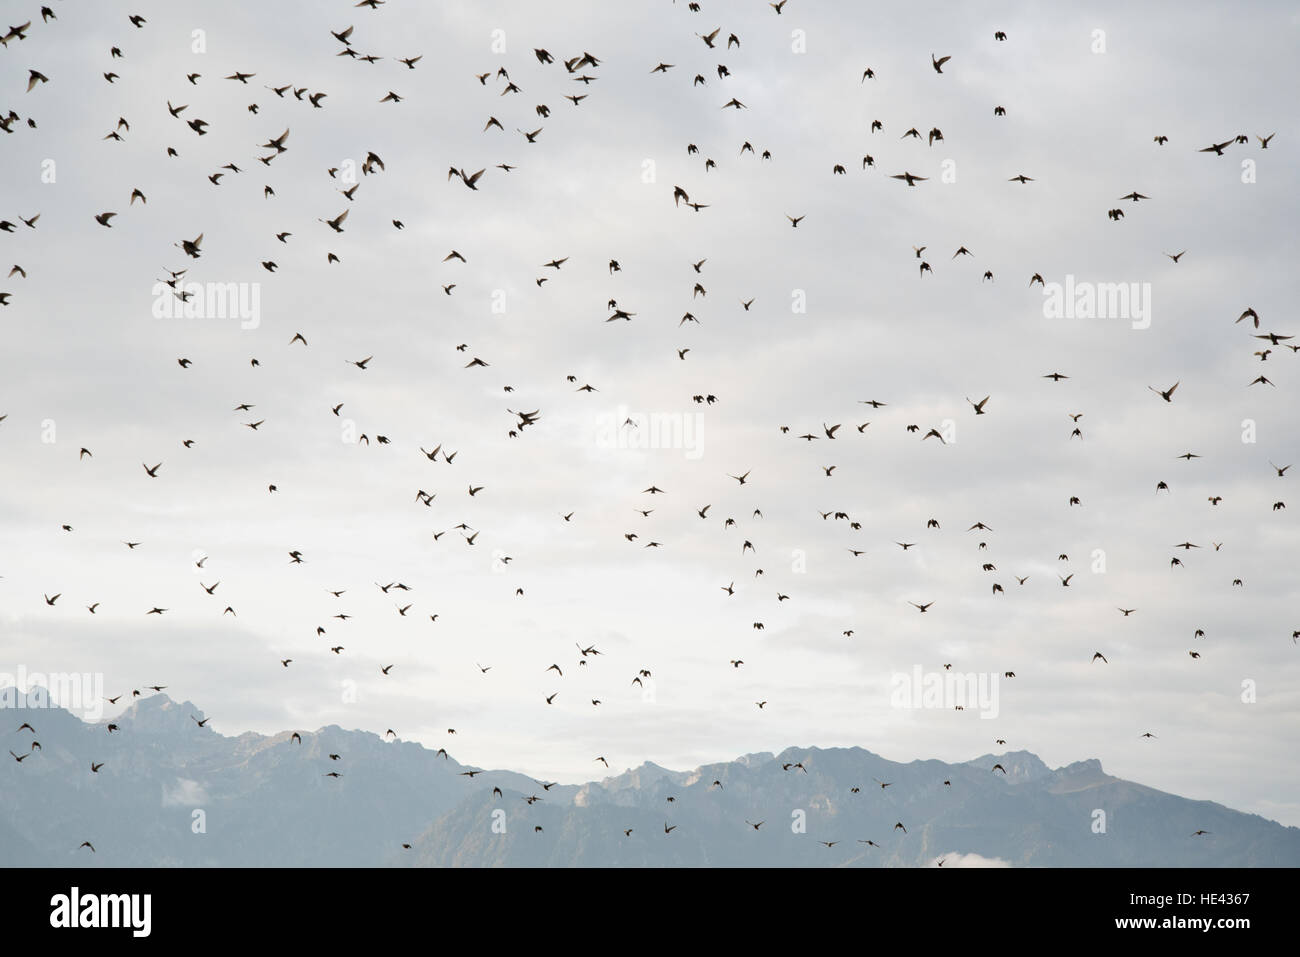 Thousands of starlings migrating over the Alps at the world heritage site vineyards of Lavaux near vevey Stock Photo